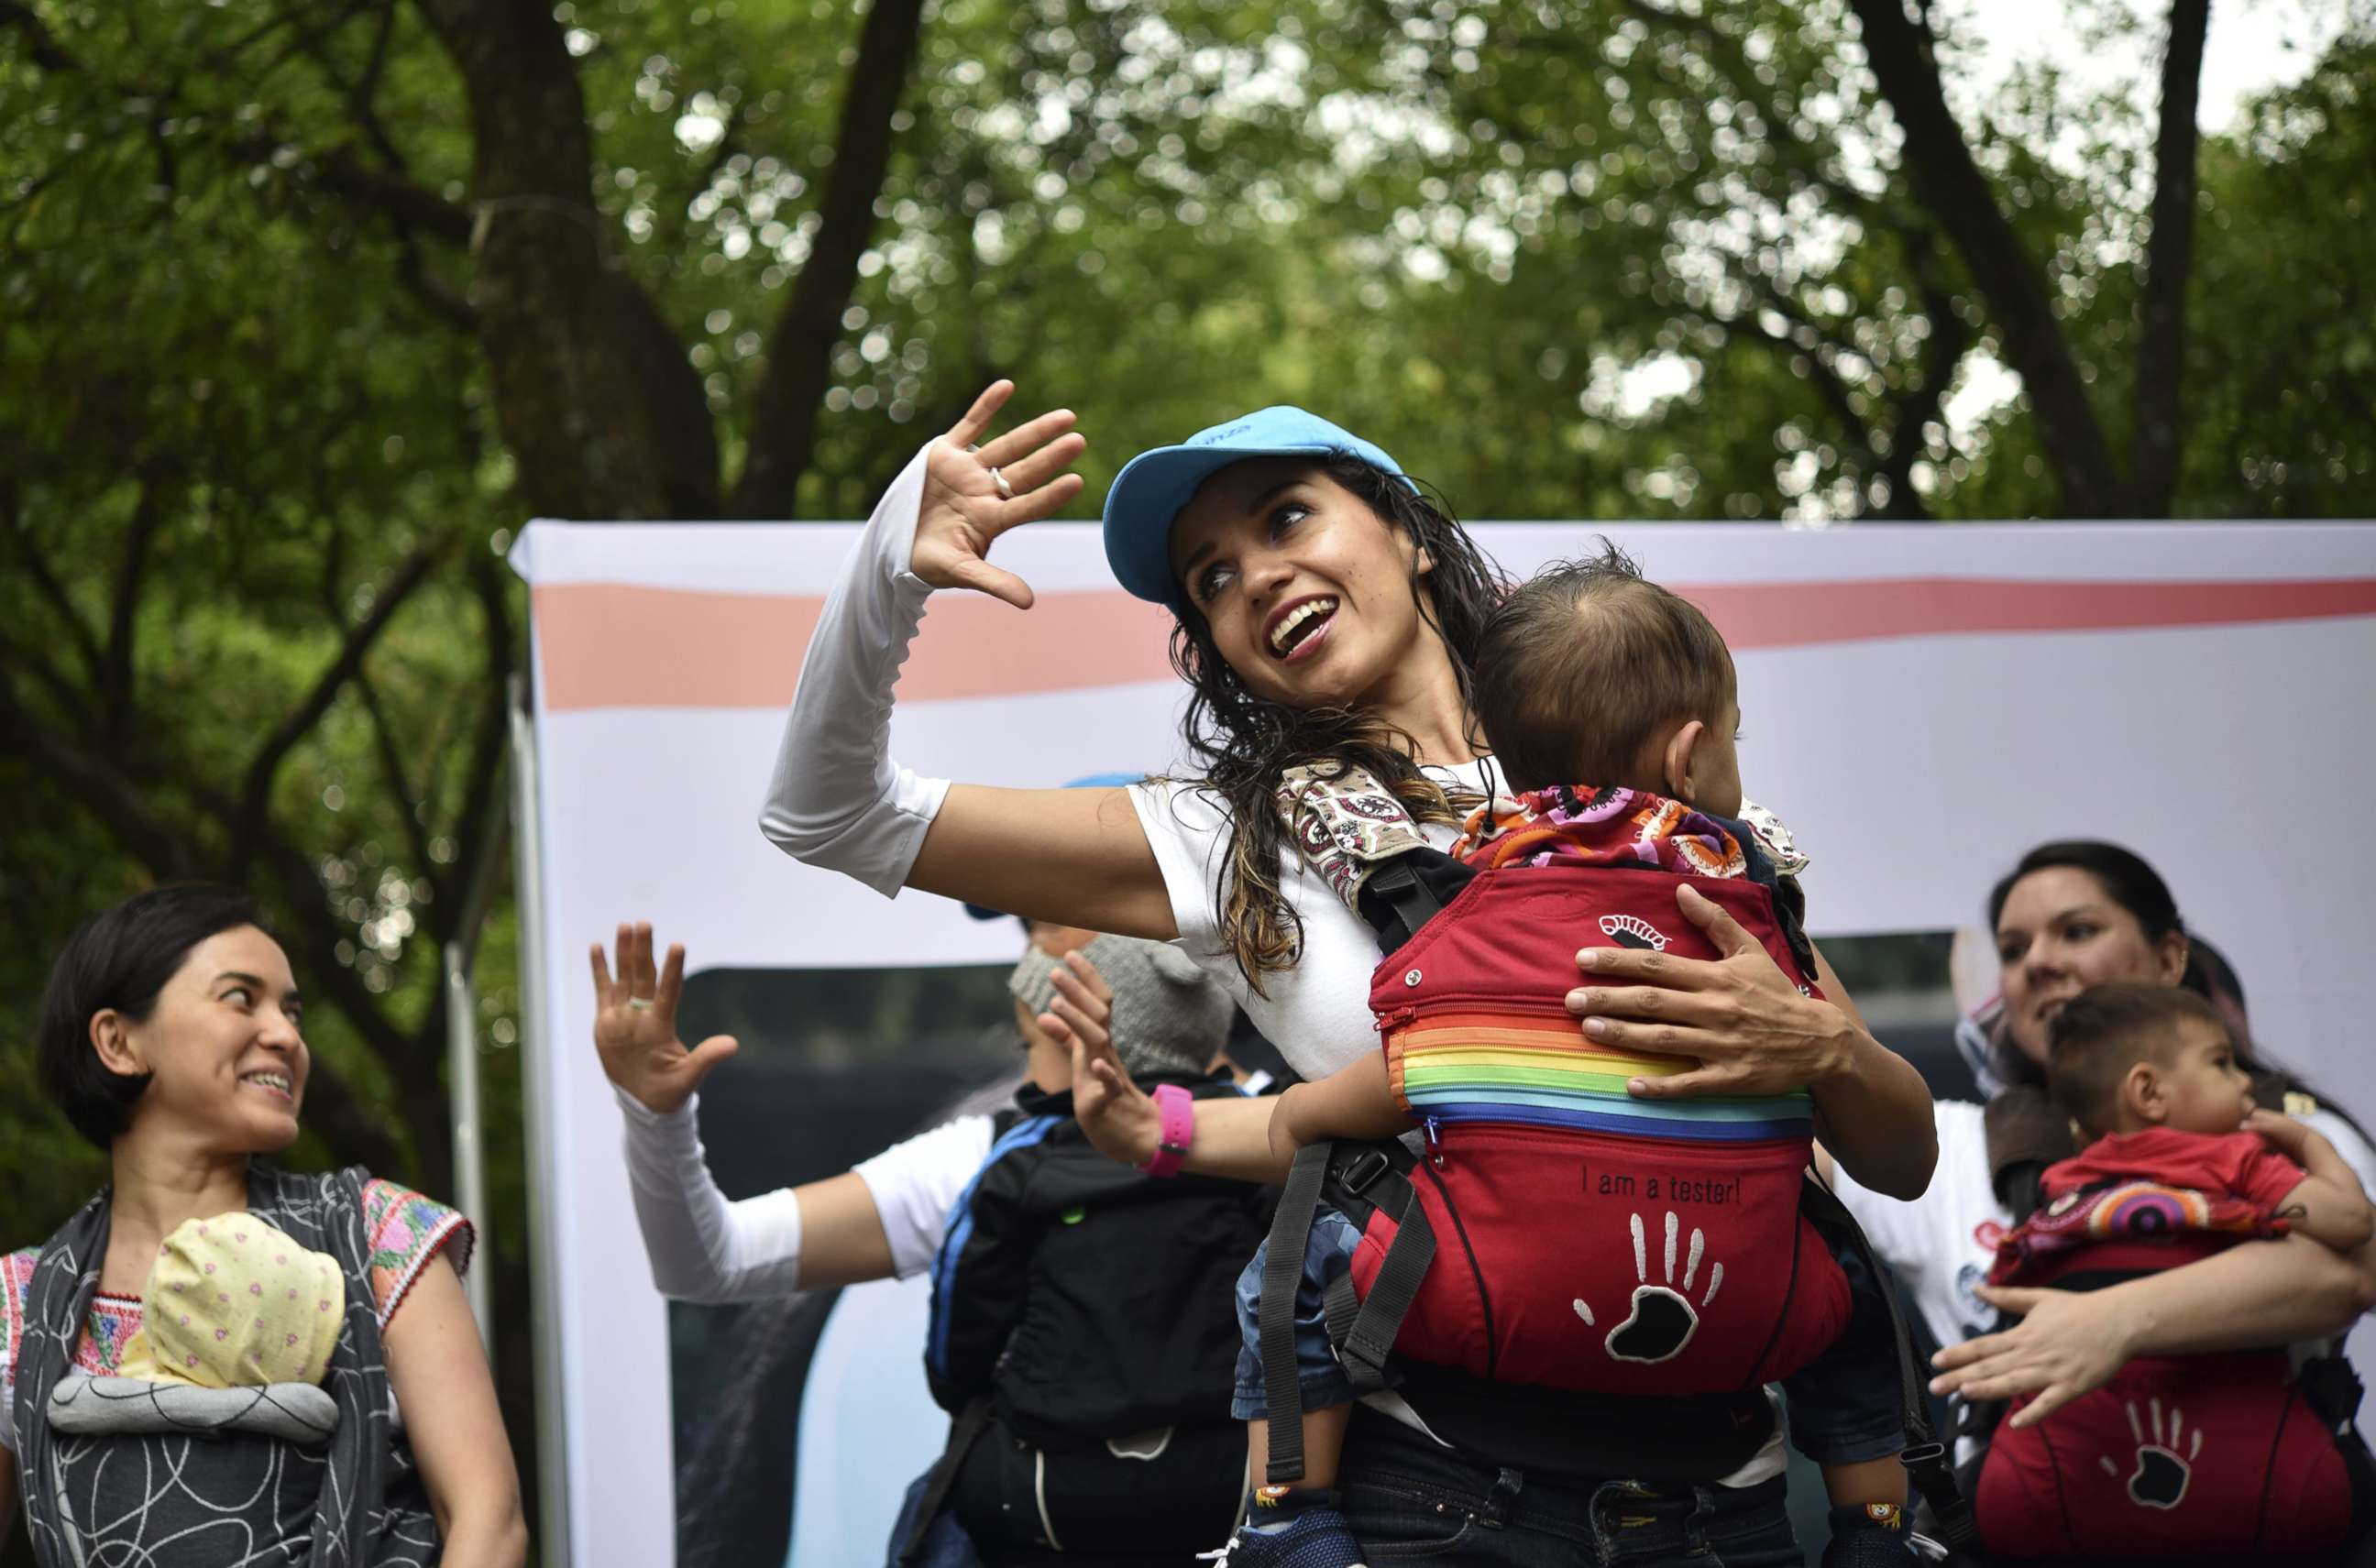 PHOTO: Mothers carrying their children perform during the "Big Latch On" breastfeeding festival held at the Bonatic Garden of the Chapultepec Park in Mexico City on Aug. 5, 2017.